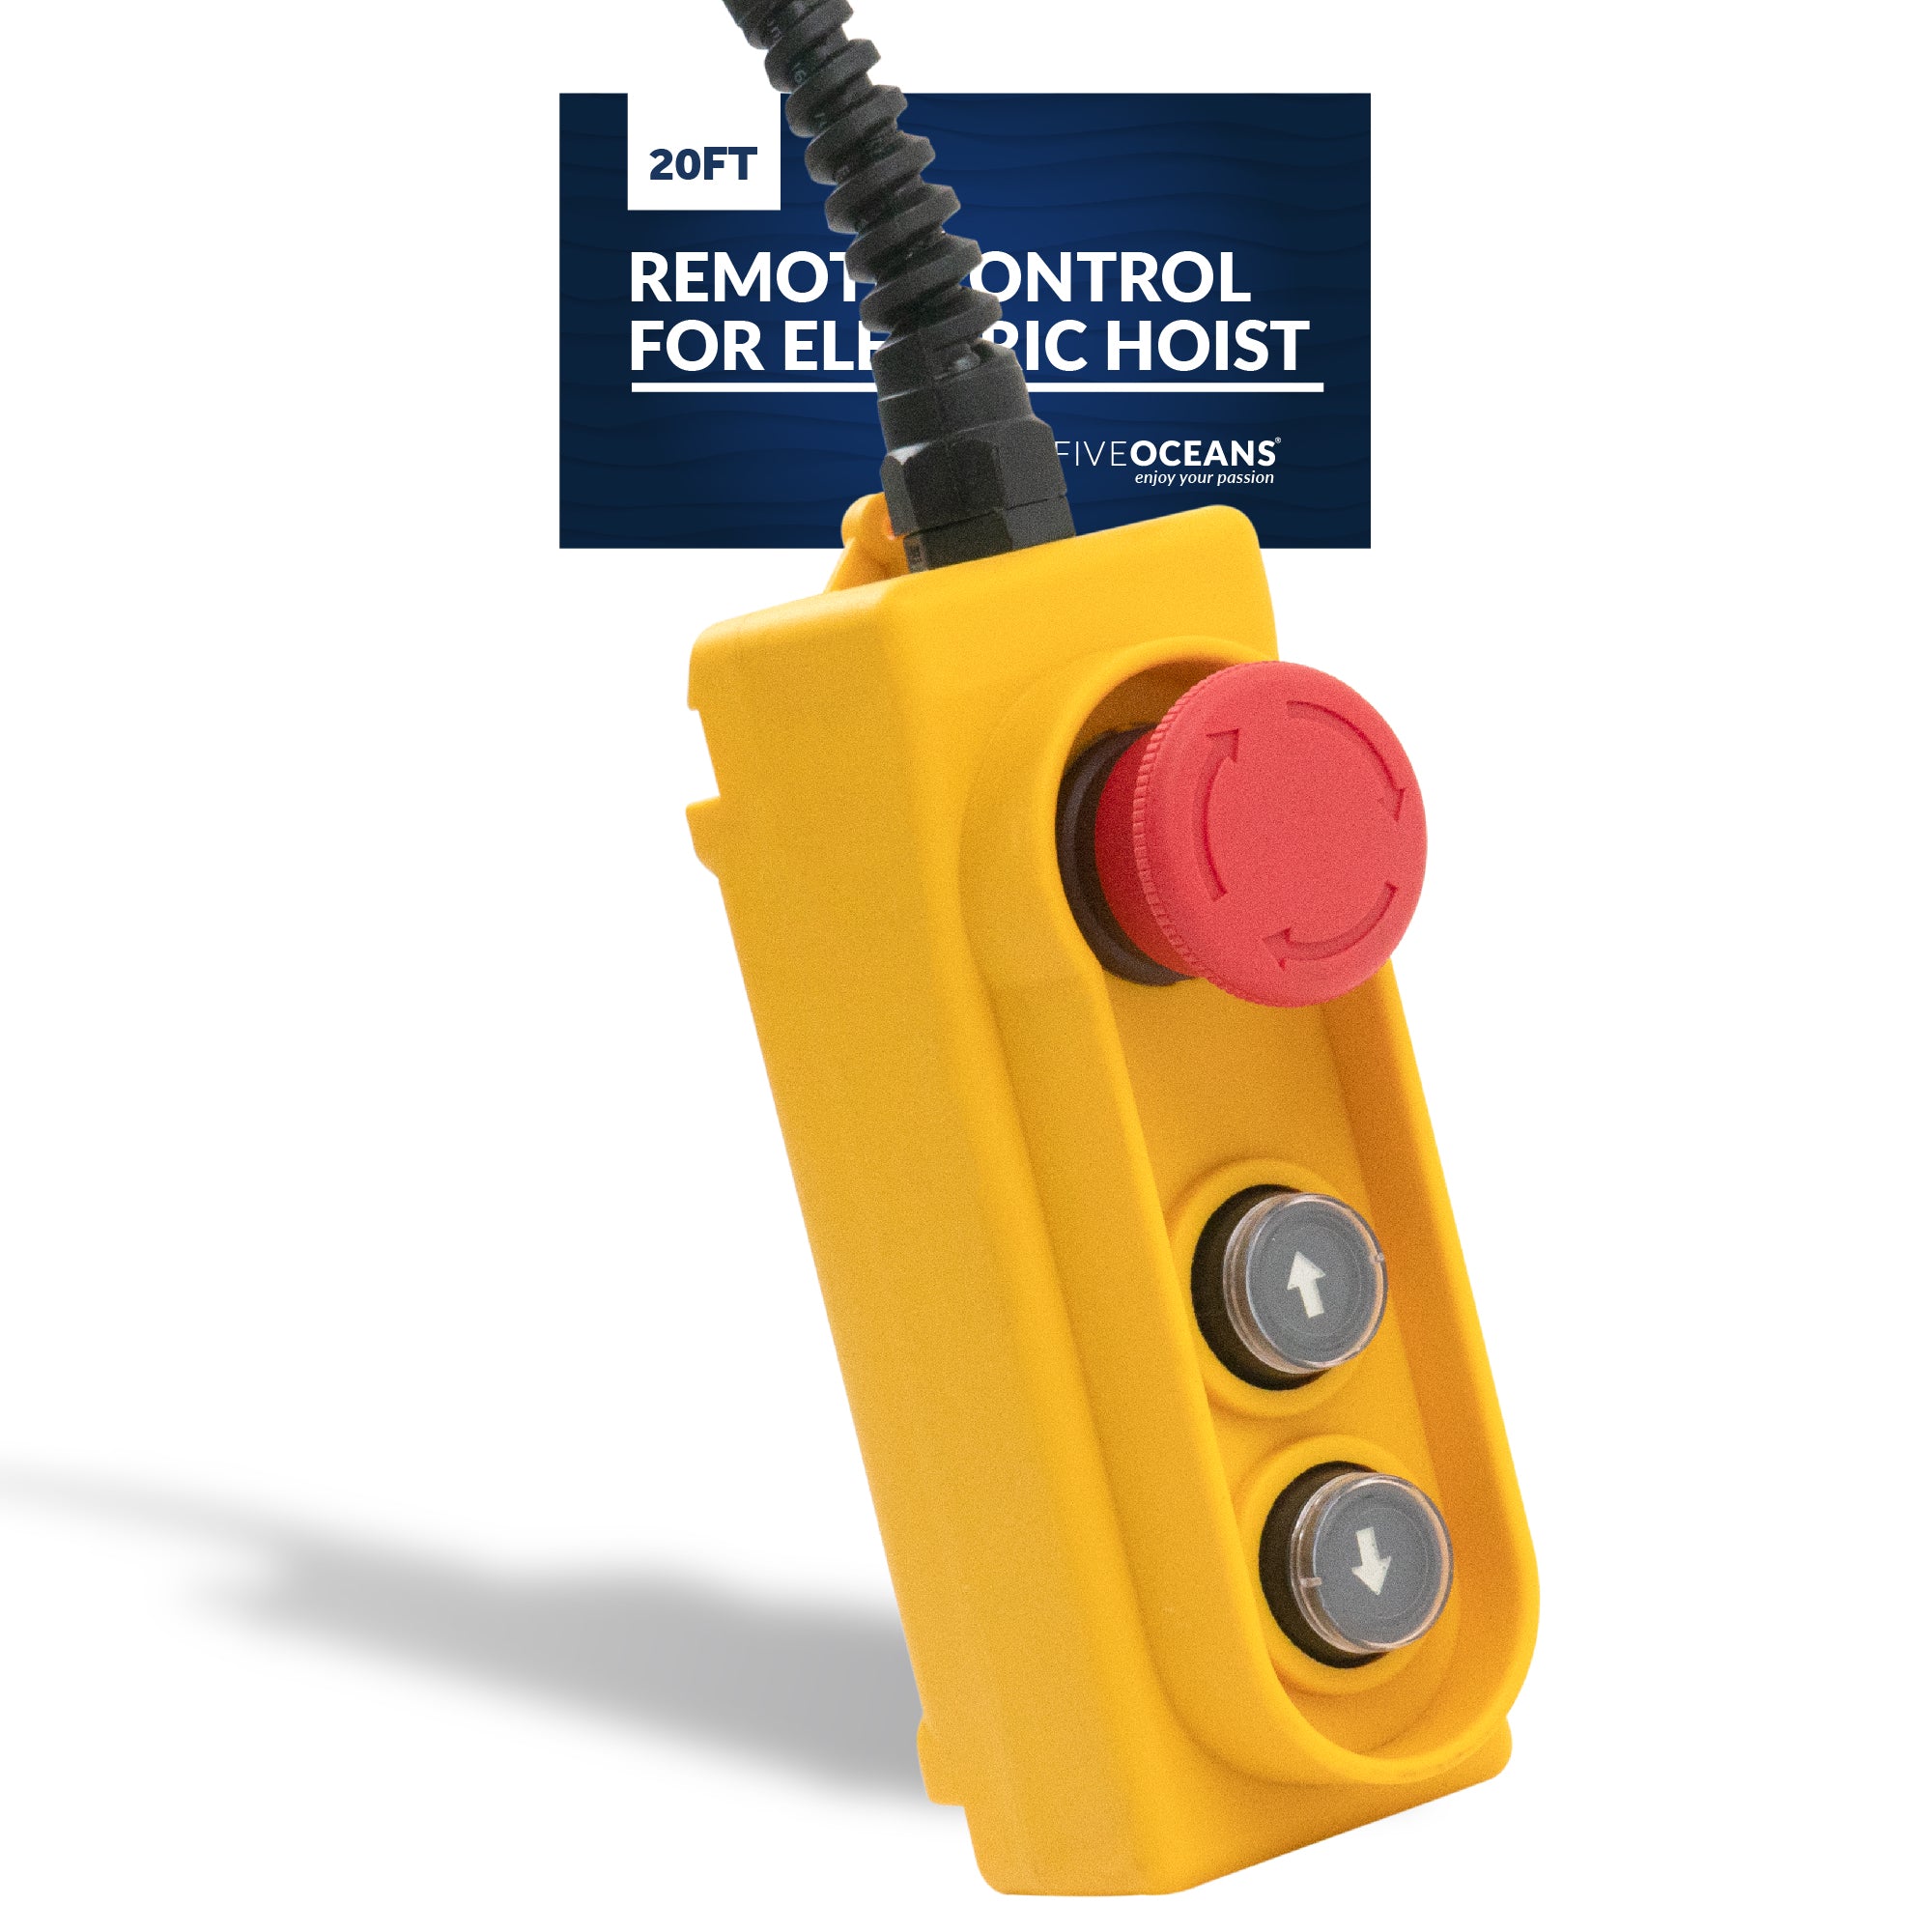 Electric Hoist Remote Control, 20' Cable Lenght - FO4319